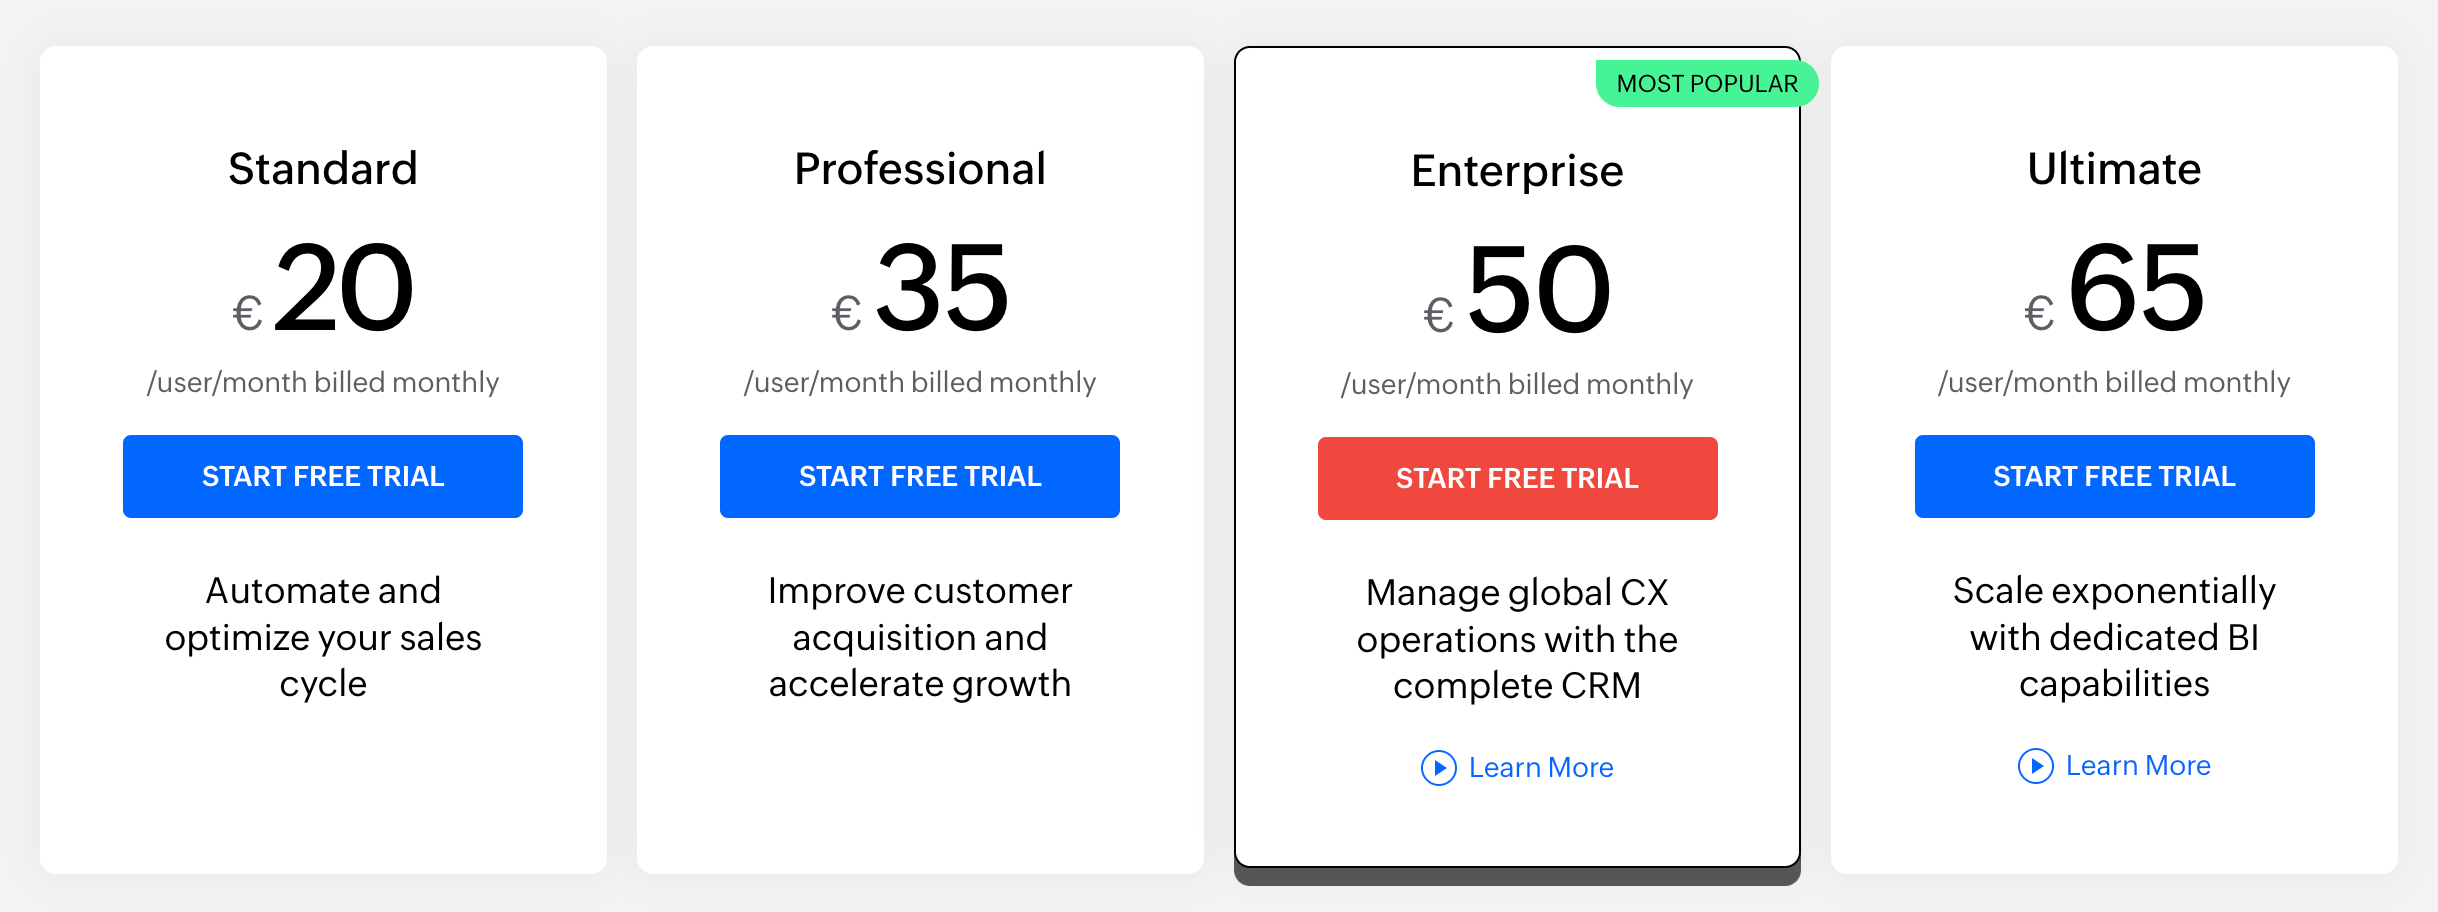 30+ Best SaaS Tools to Help Your Small Business Increase Sales in 2023